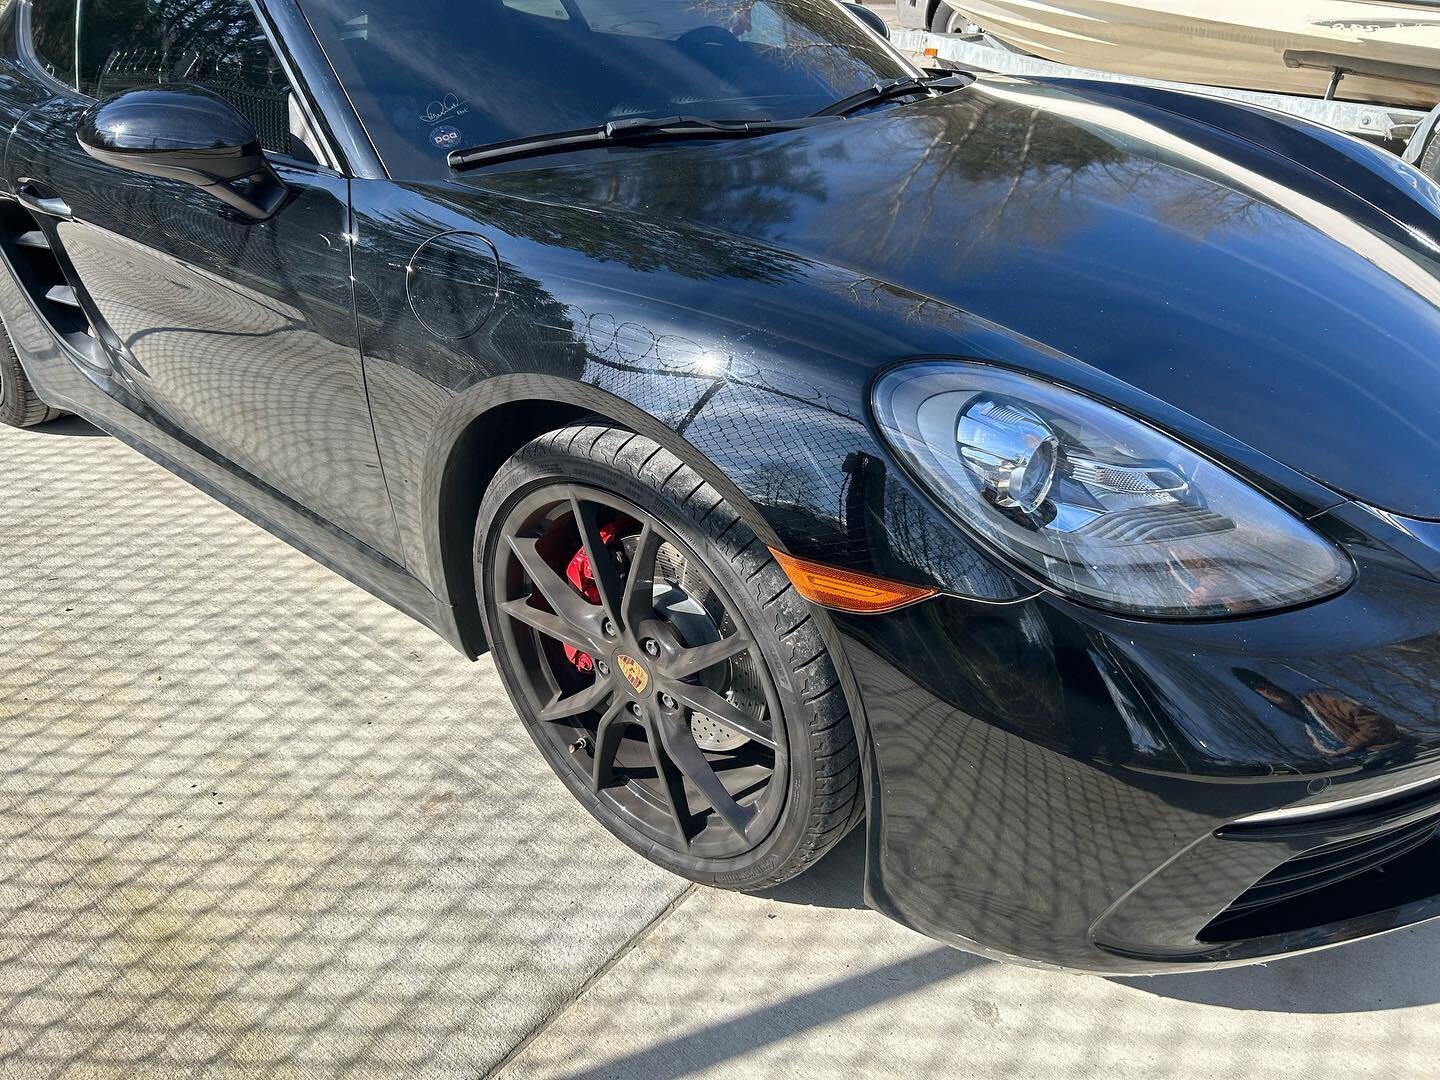 Mz Auto Detail 

polishing and rectification of paint and clay bar and wax in black Porch!
(425)326-2768
contact@mzautodetail.com 
automz@outlook.com
www.mzautodetail.com
For any questions or appointment! #seattleautodetail